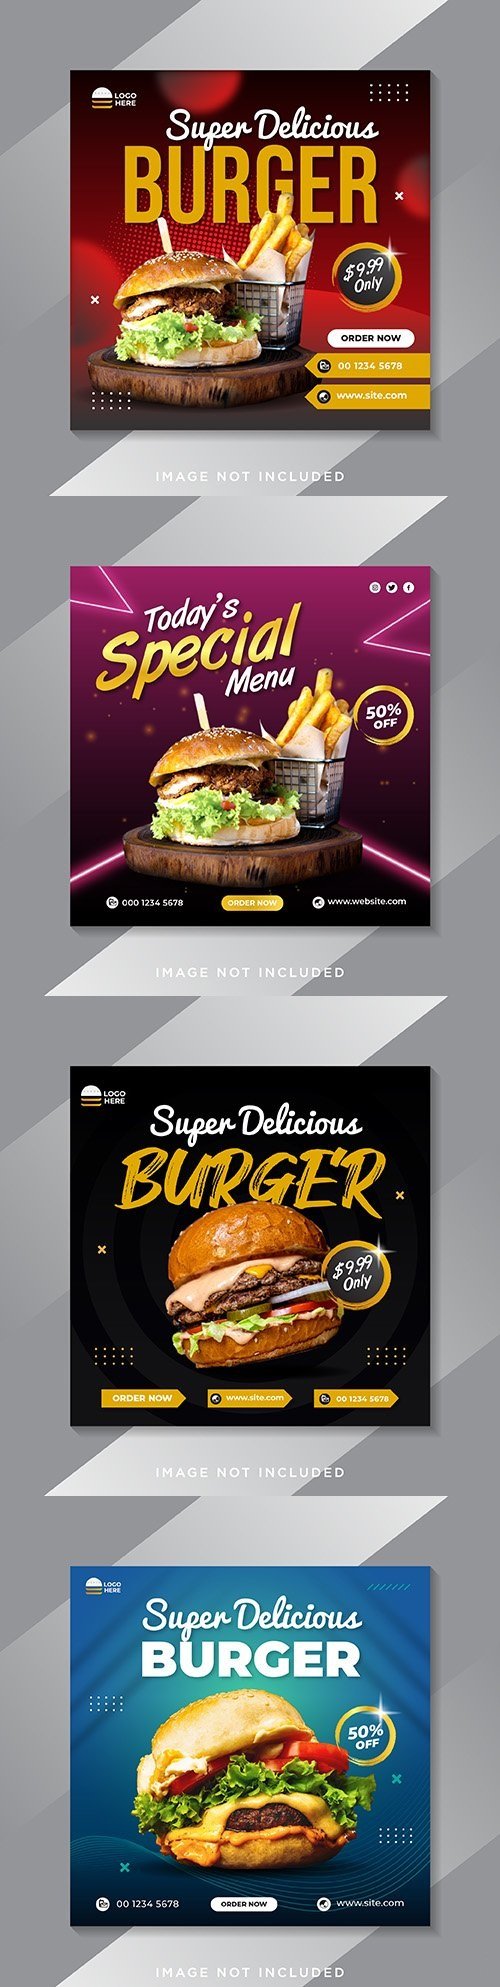 Social media message template about food menu and burger restaurant